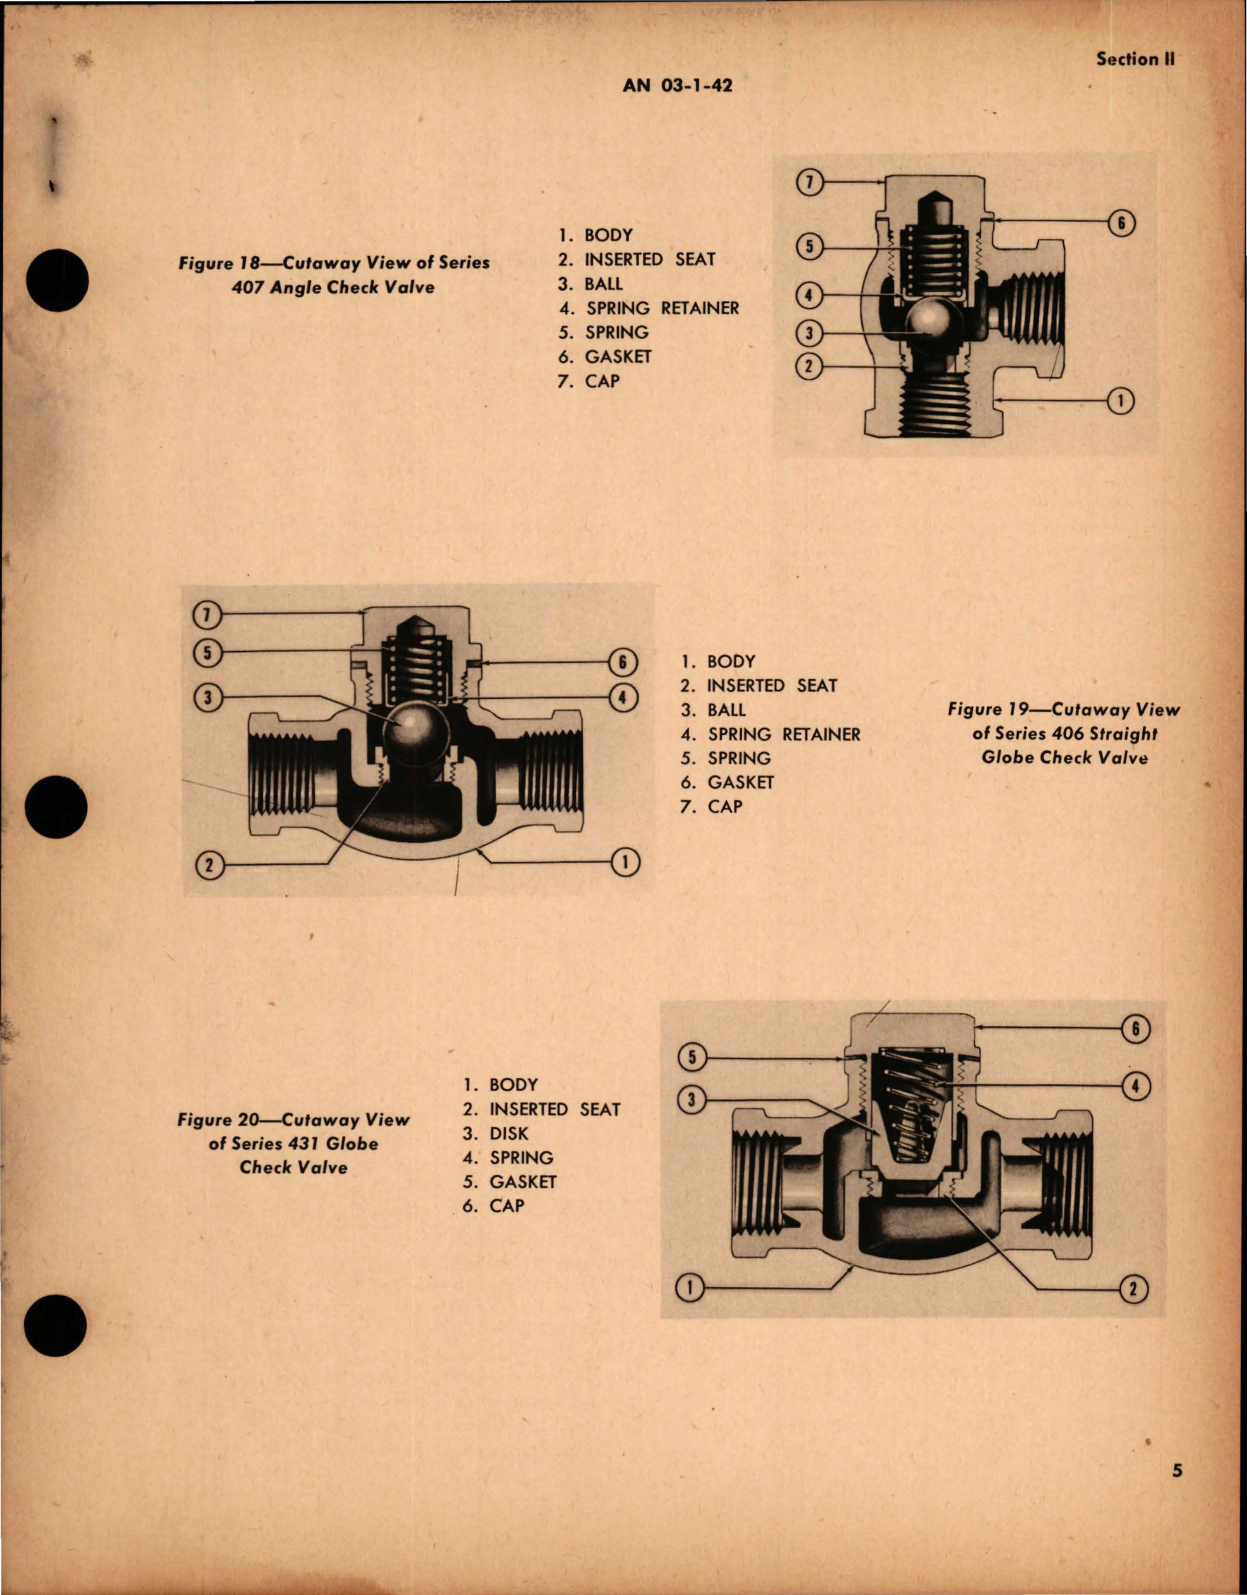 Sample page 9 from AirCorps Library document: Instructions with Parts Catalog for Check Valves